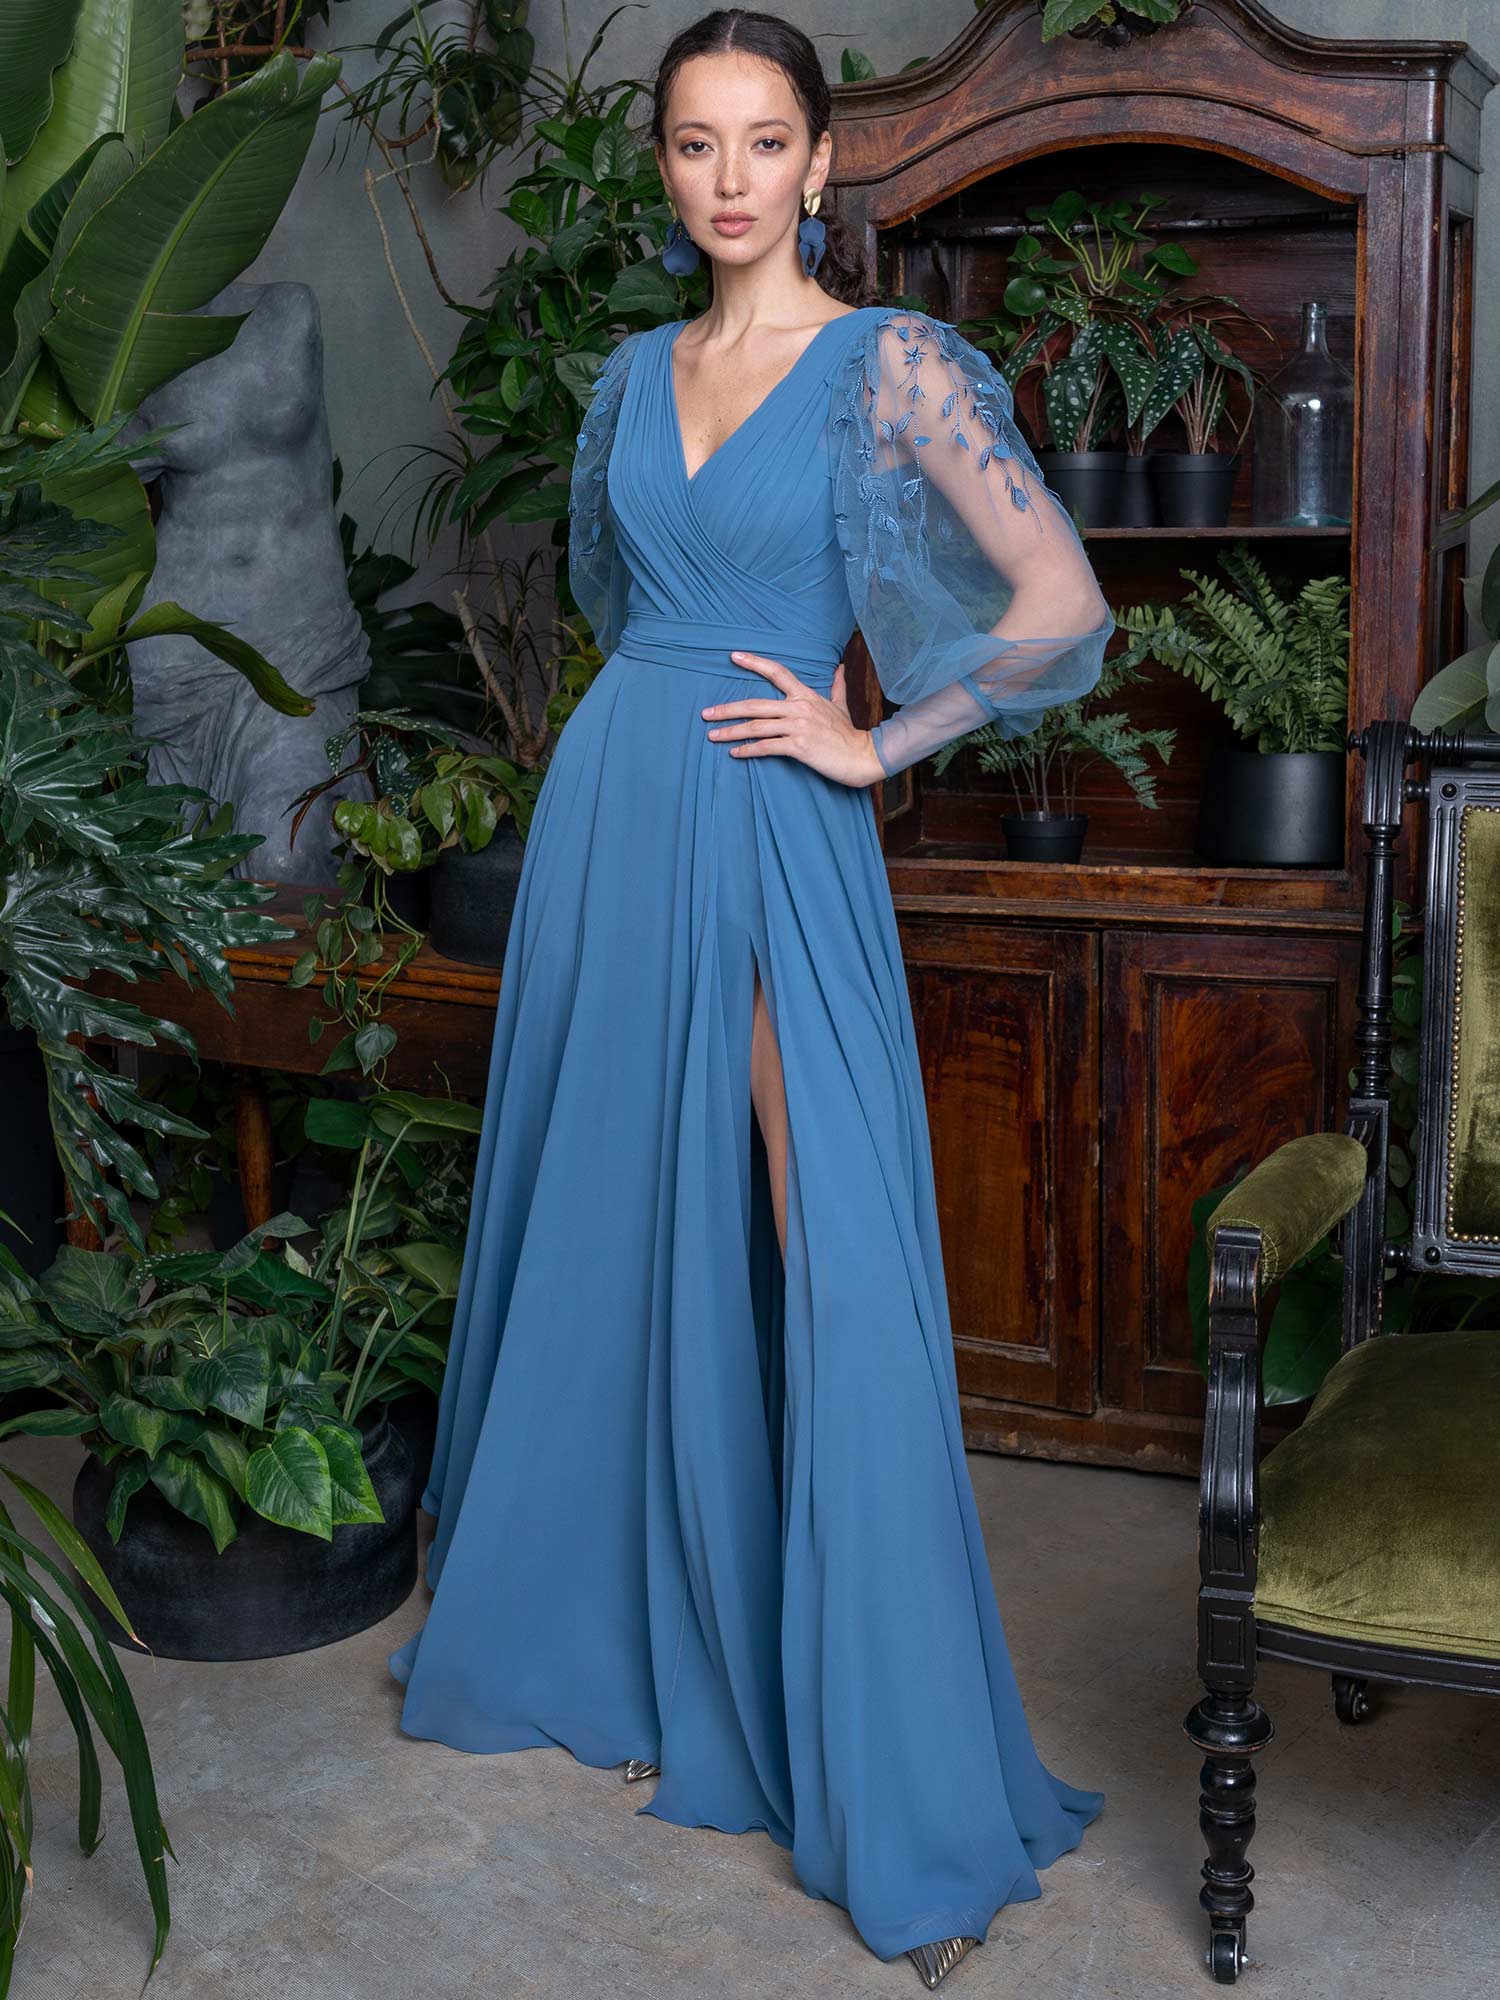 V-neck chiffon evening dress with long puffy sleeves and slit skirt